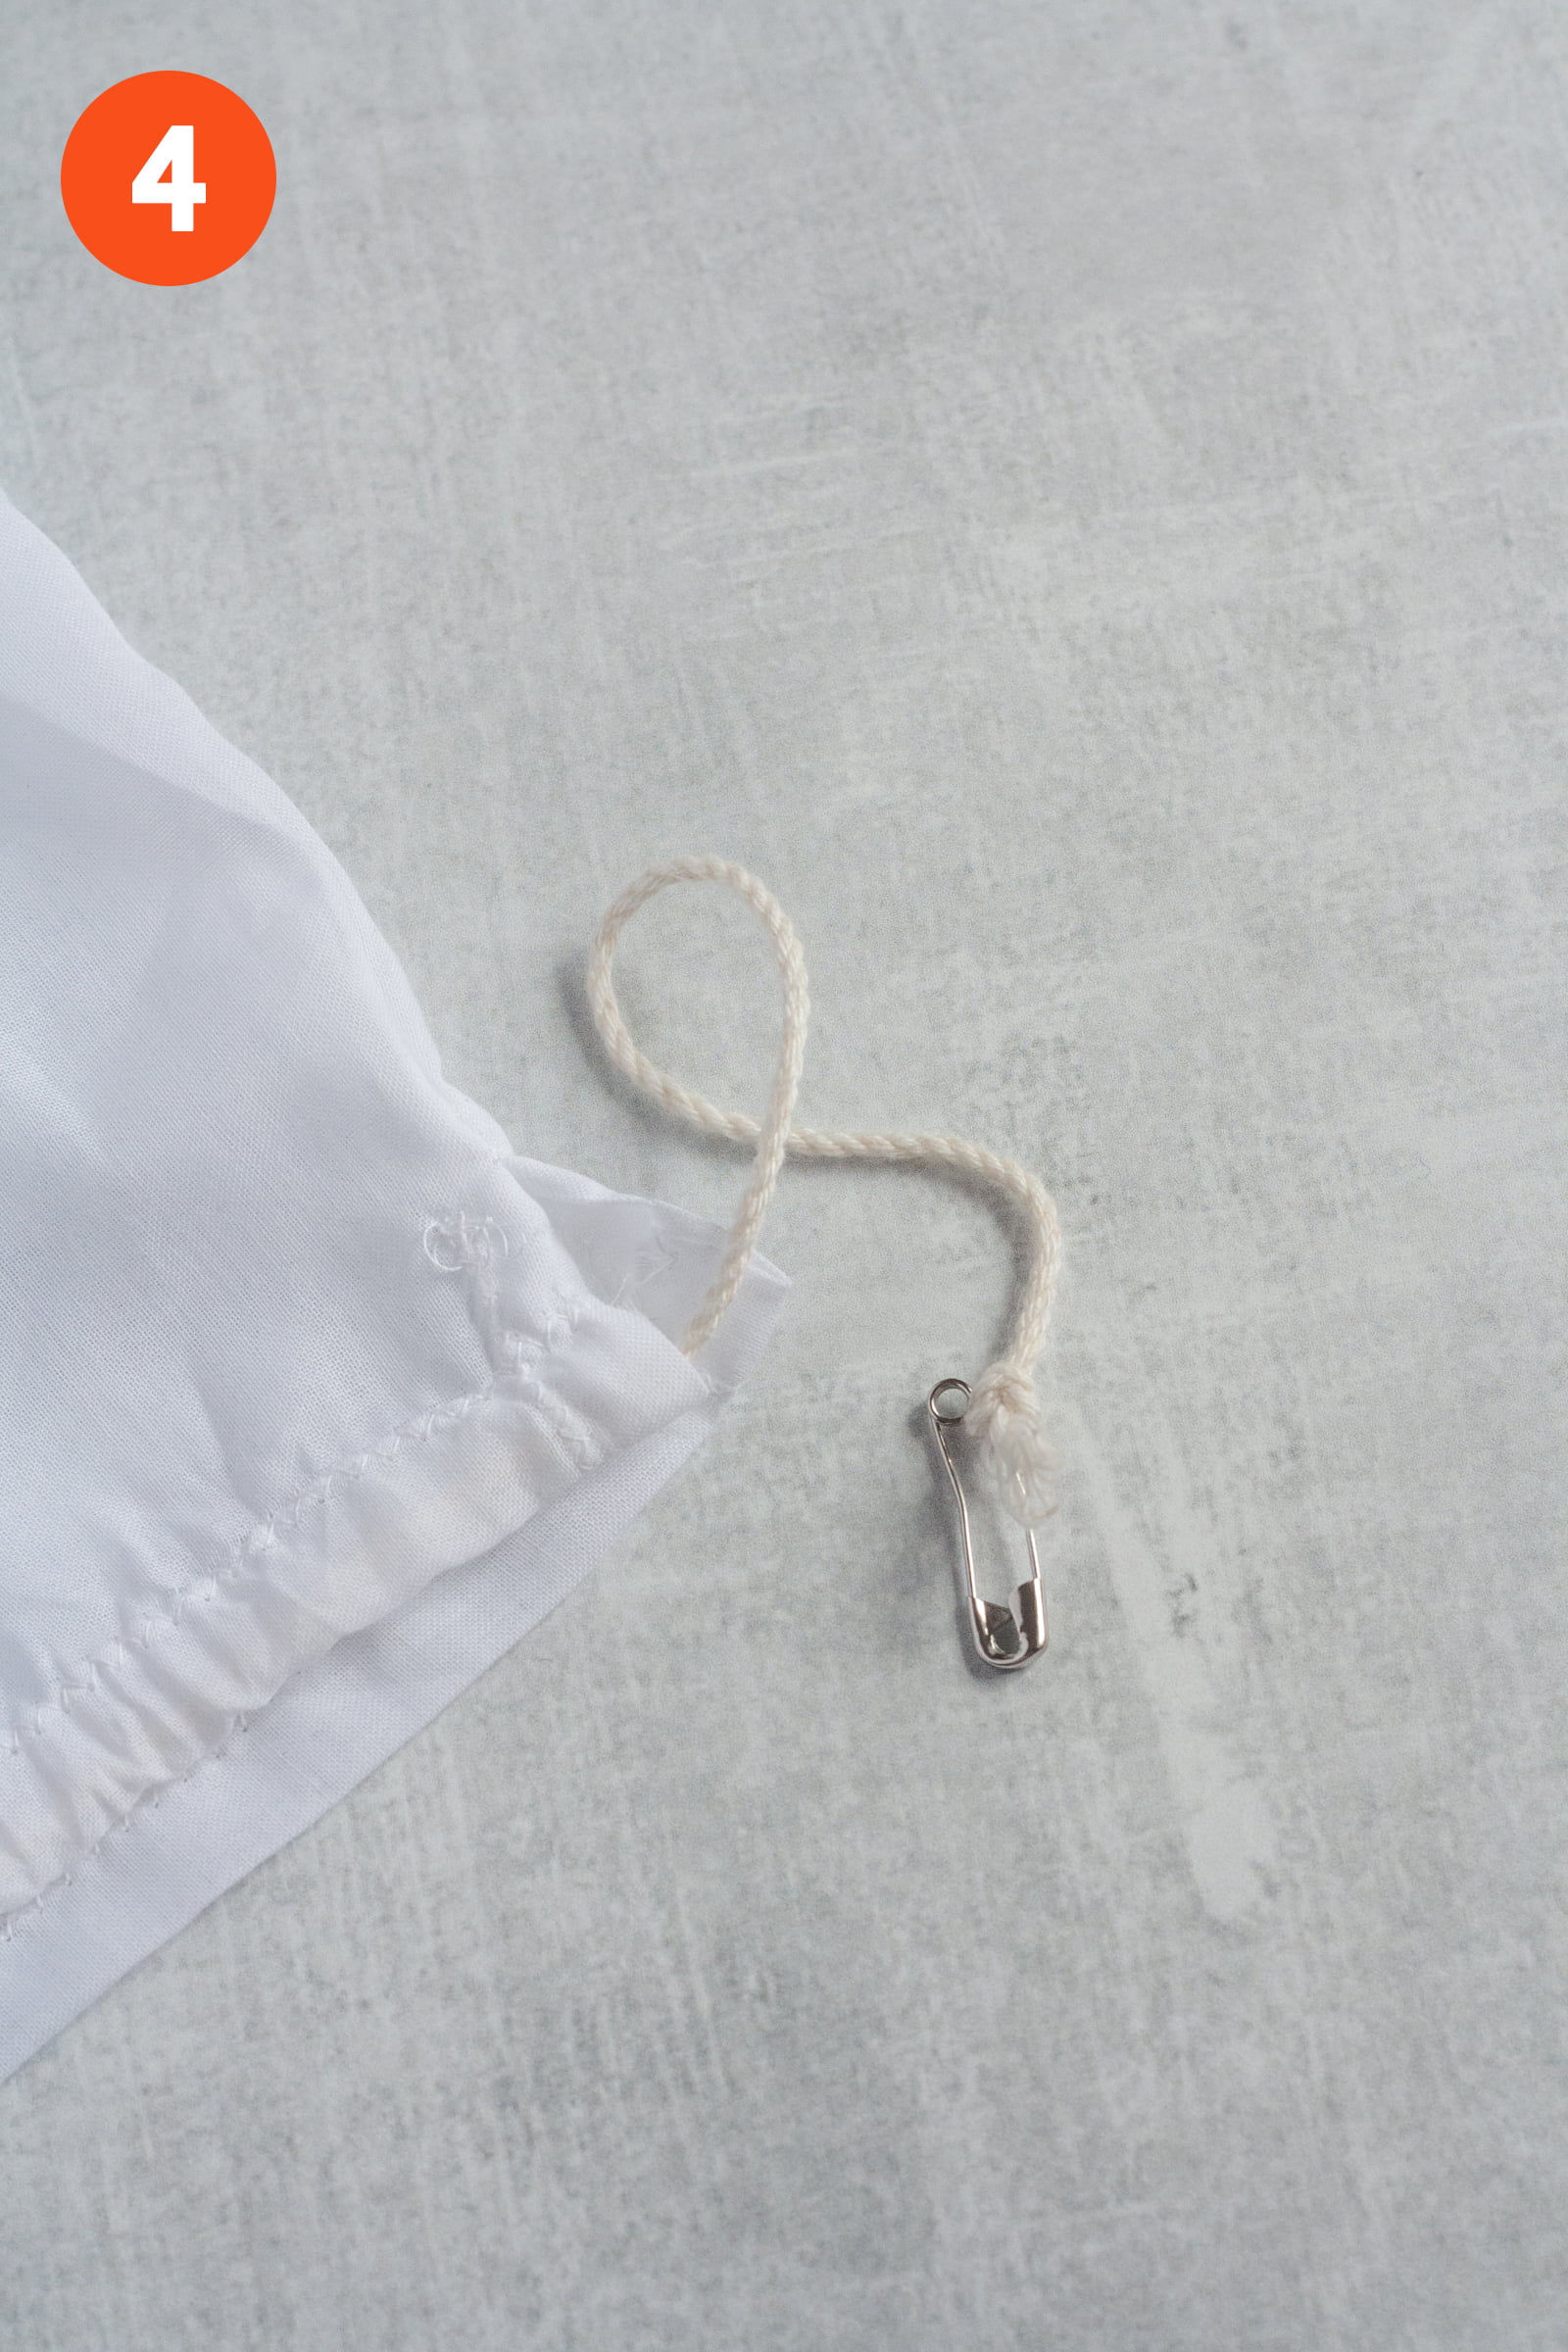 Safety pin with cording tied around it, to help thread the drawstring. Labeled with a 4.